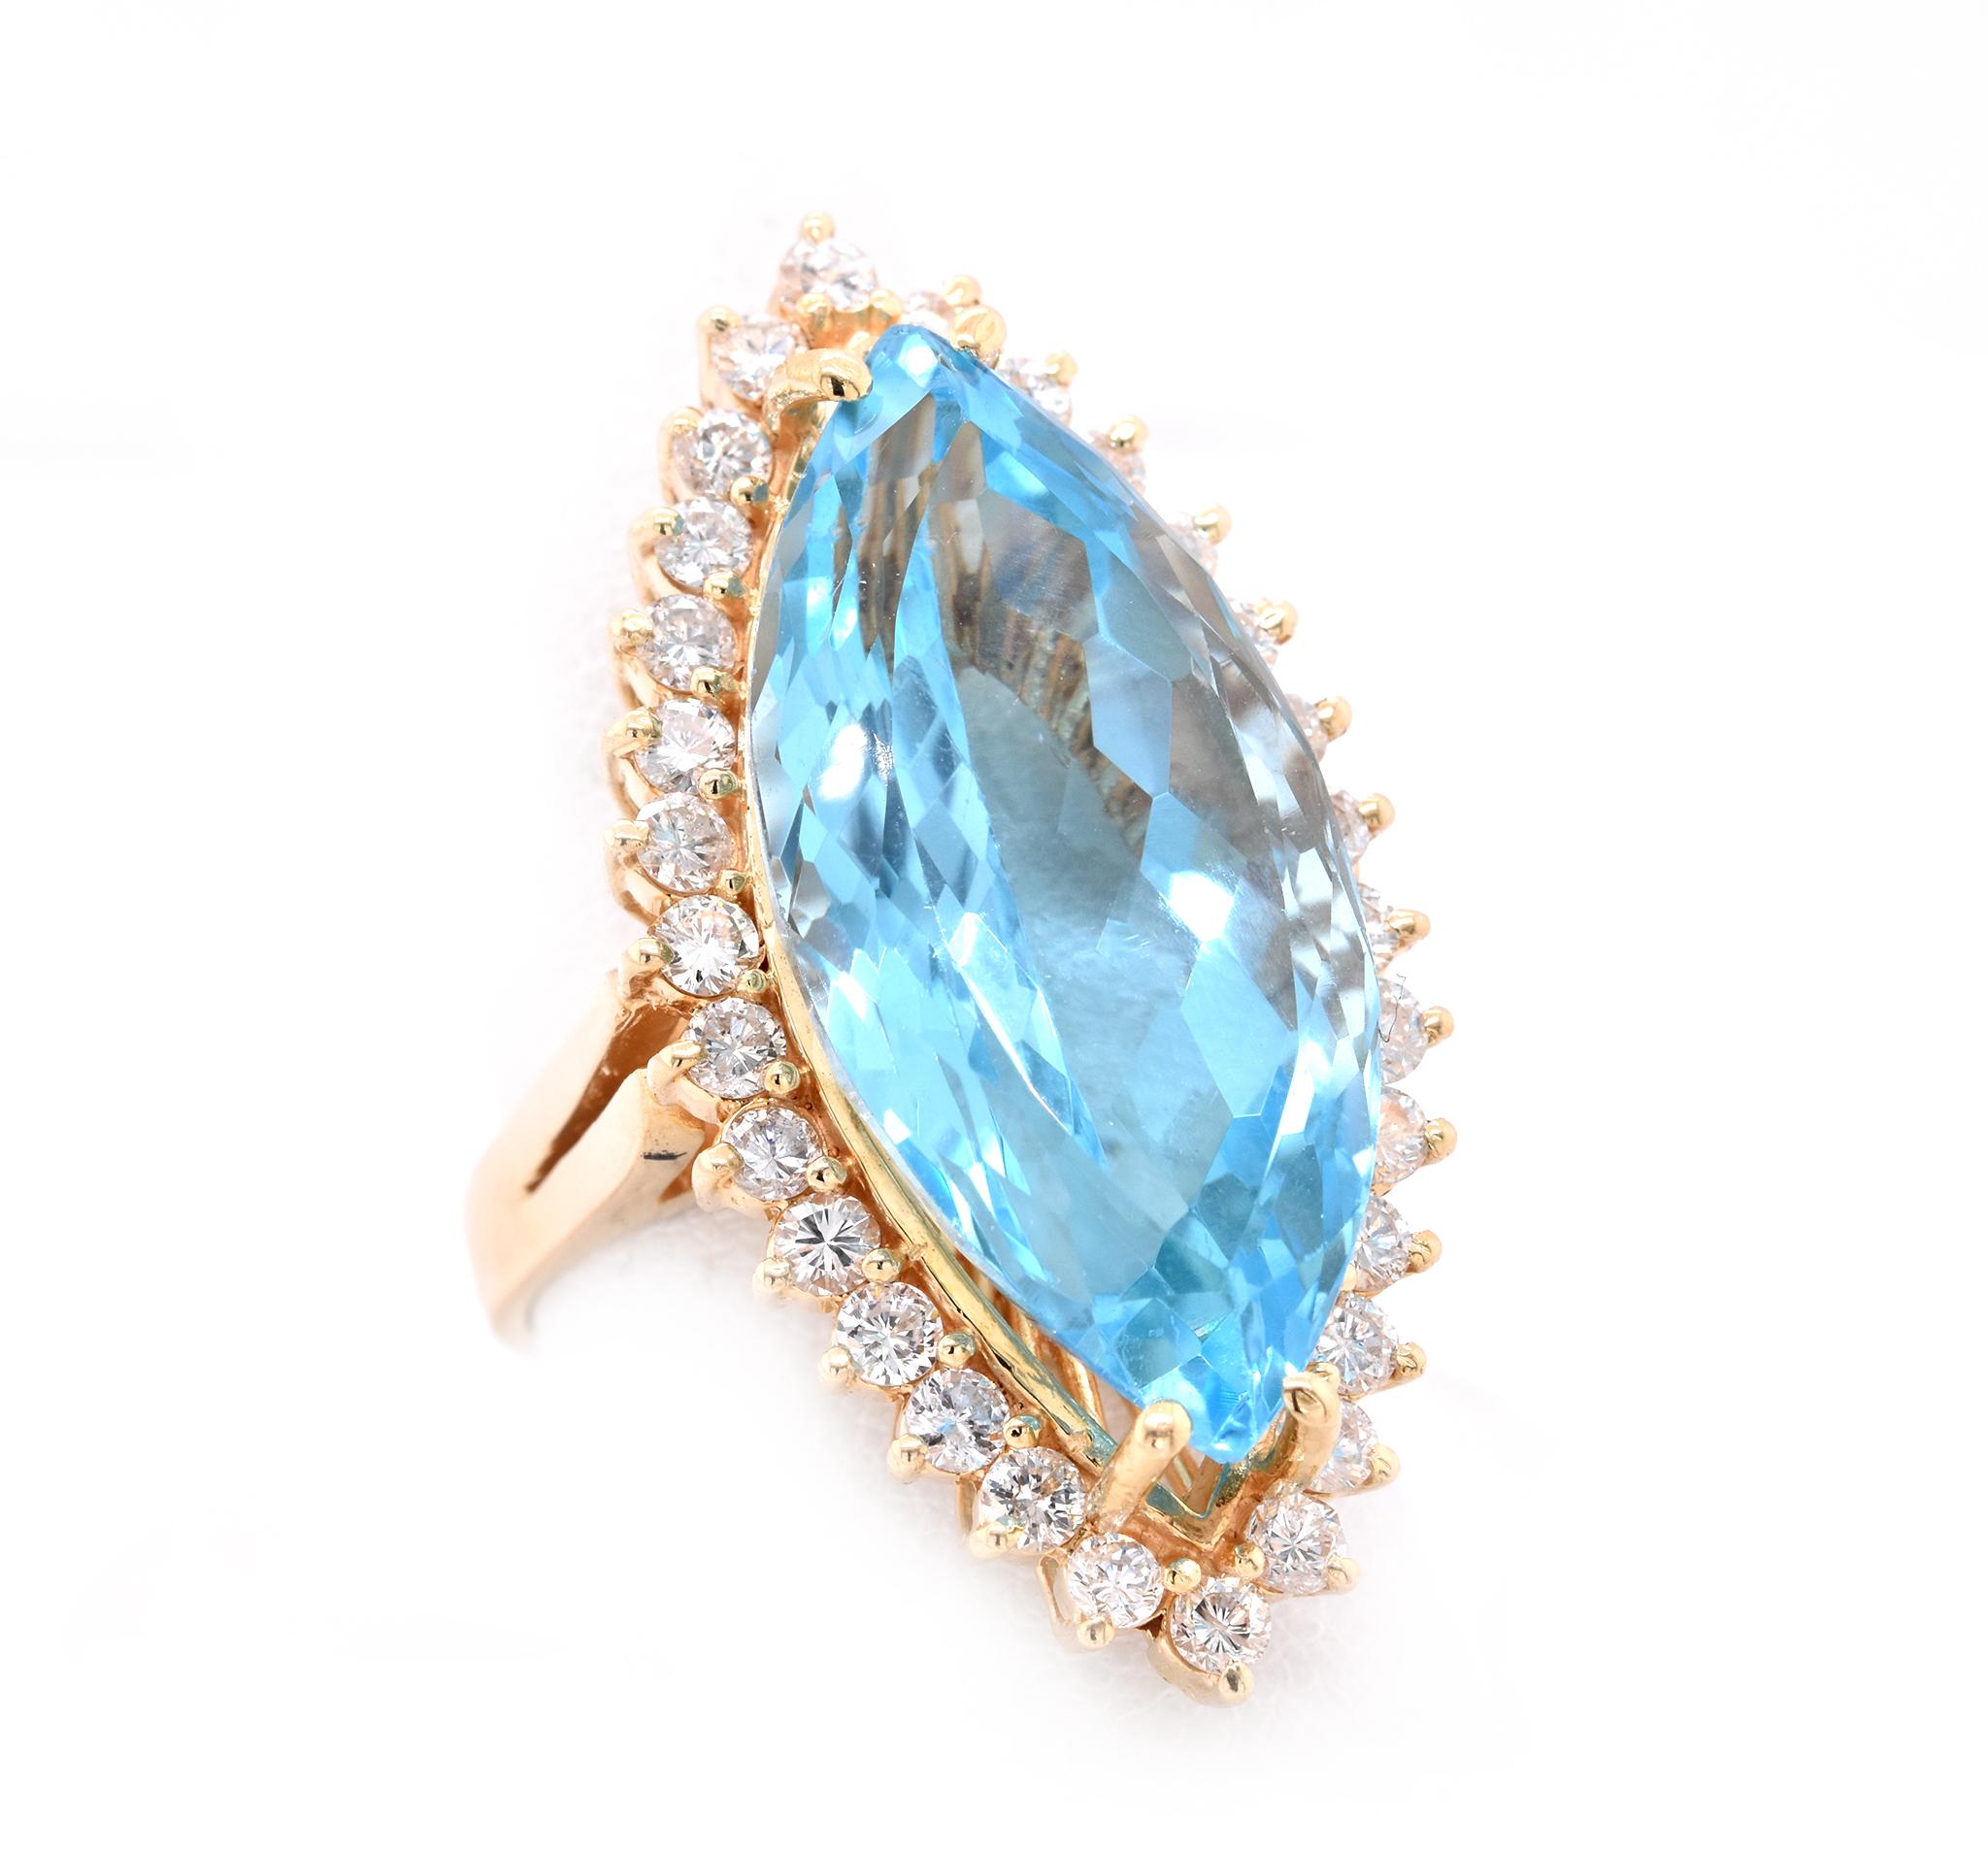 Designer: custom
Material: 14K yellow gold
Blue Topza: 1 marquise cut = 19.43ct
Diamond: 30 round cut = 1.50cttw
Color: G
Clarity: VS
Ring Size: 7.25 (please allow up to 2 additional business days for sizing requests)
Dimensions: ring shank measures